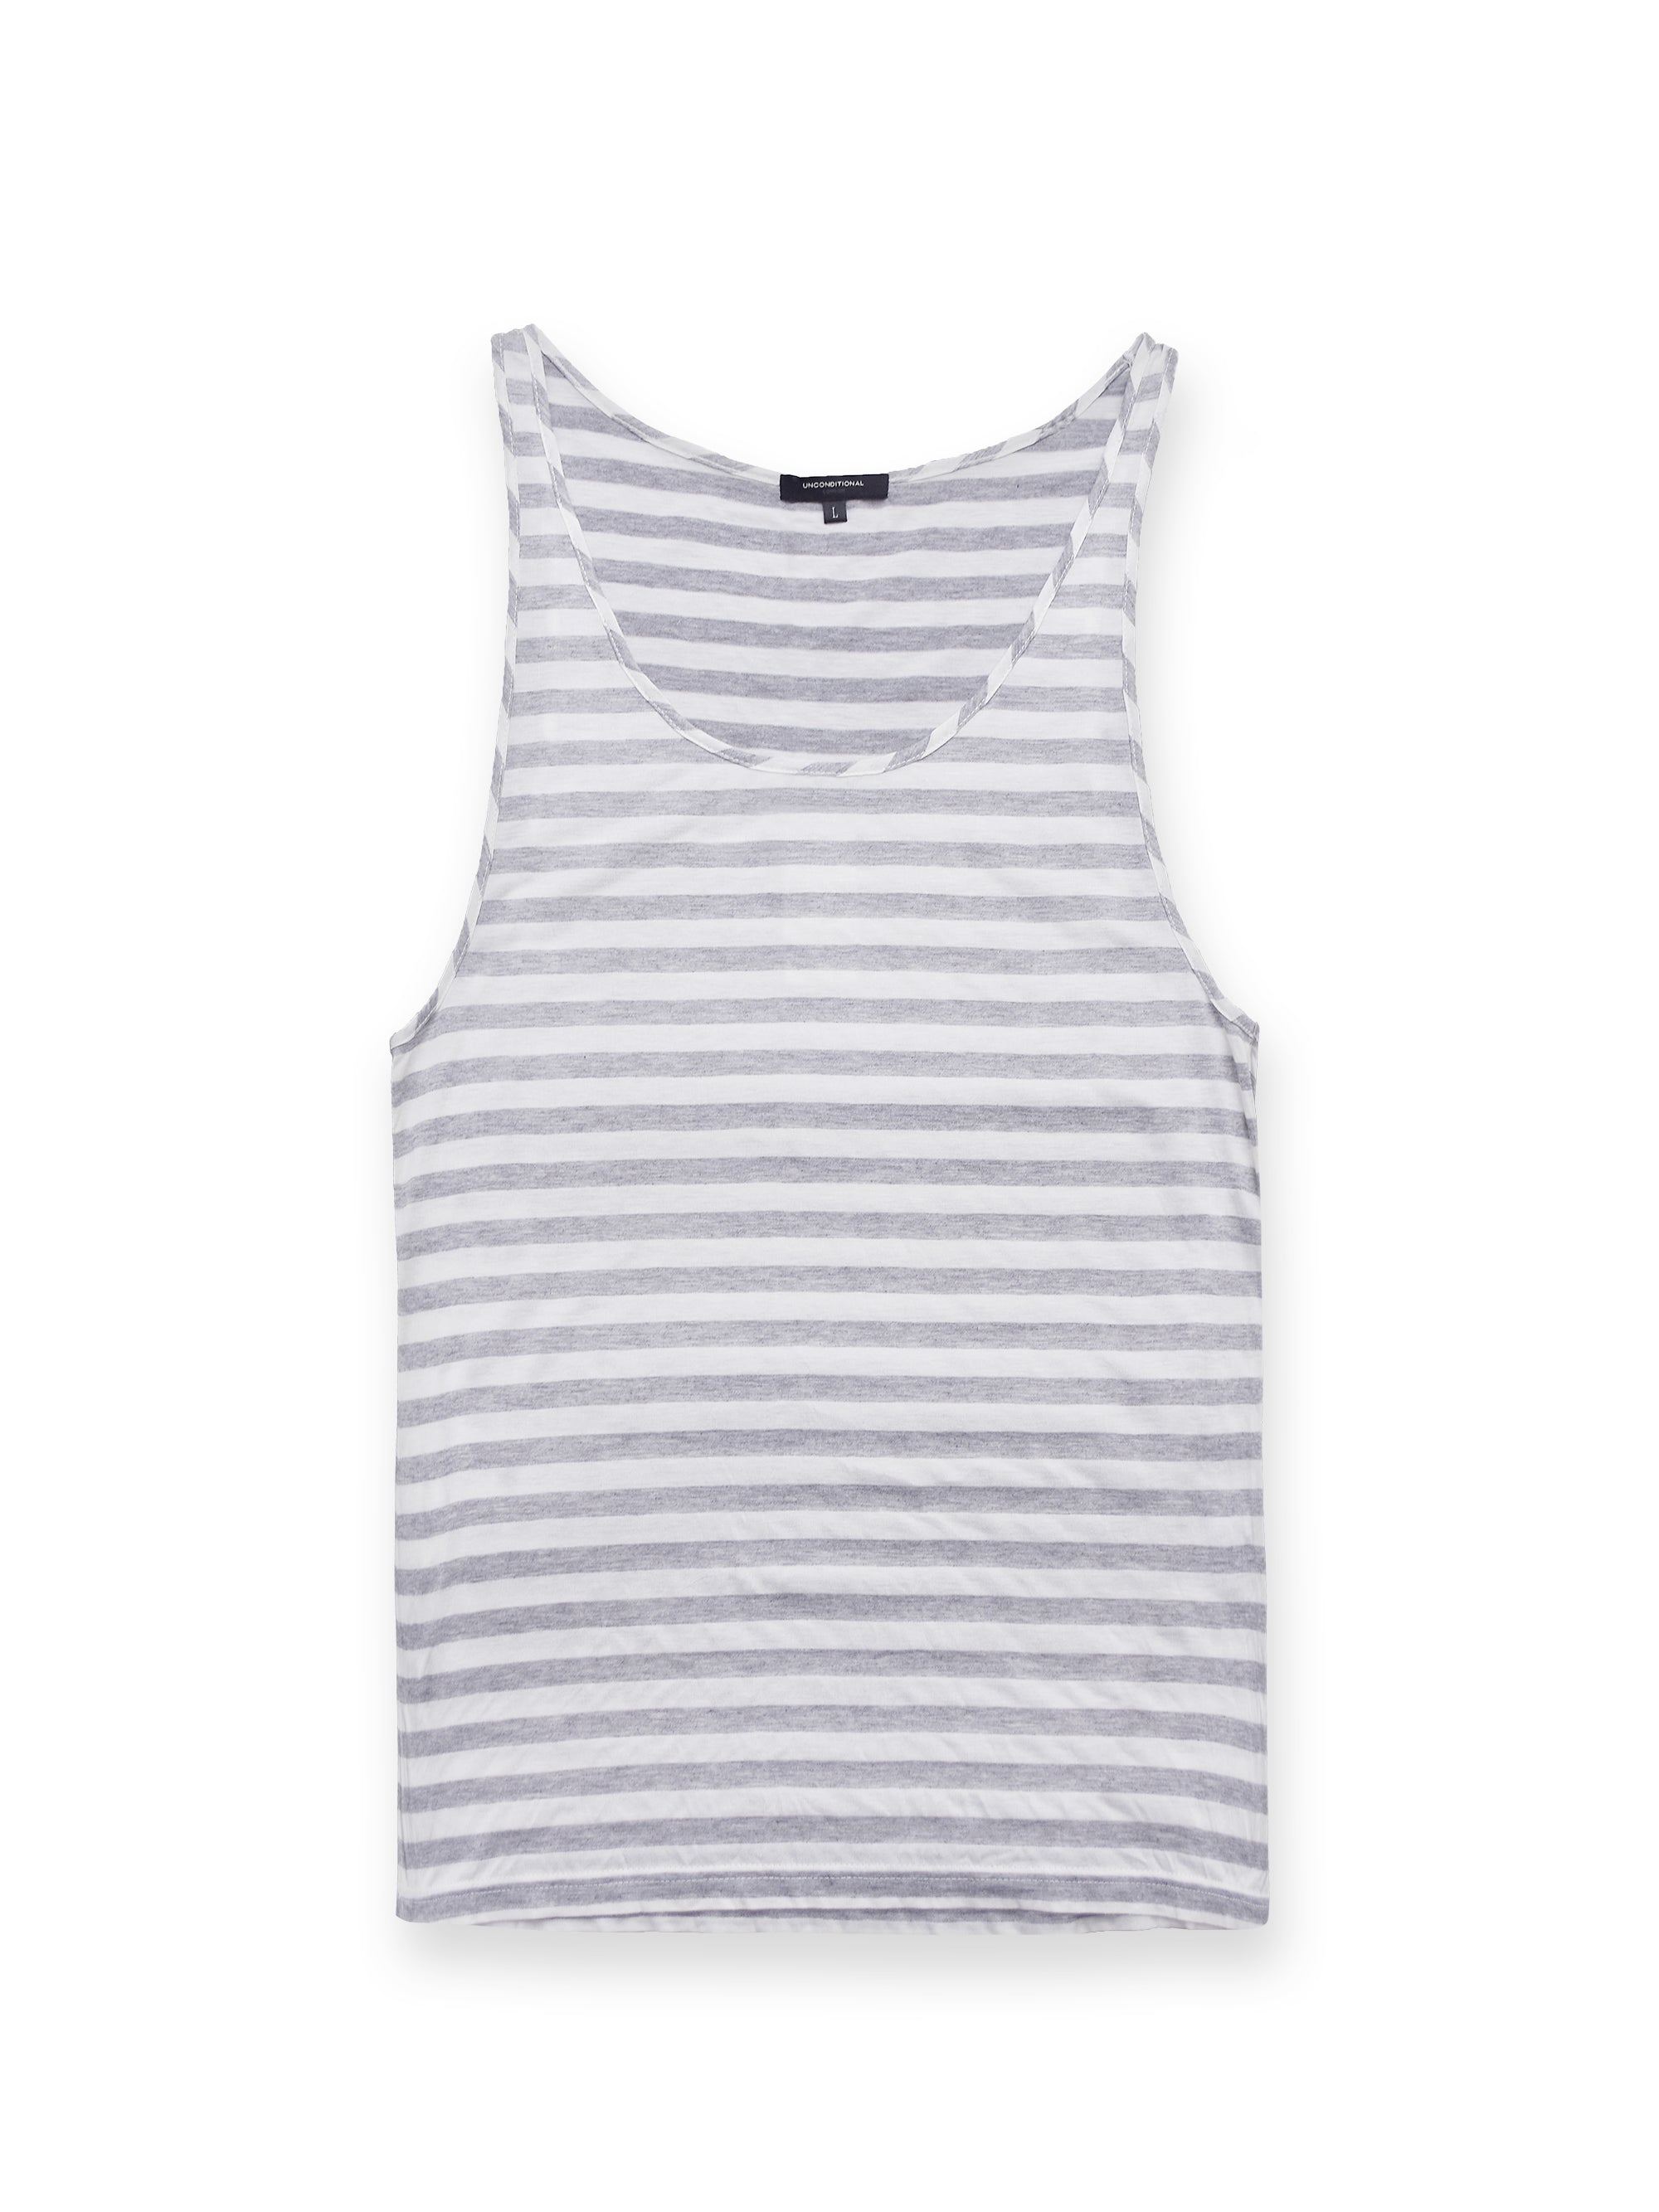 Grey and white striped vest